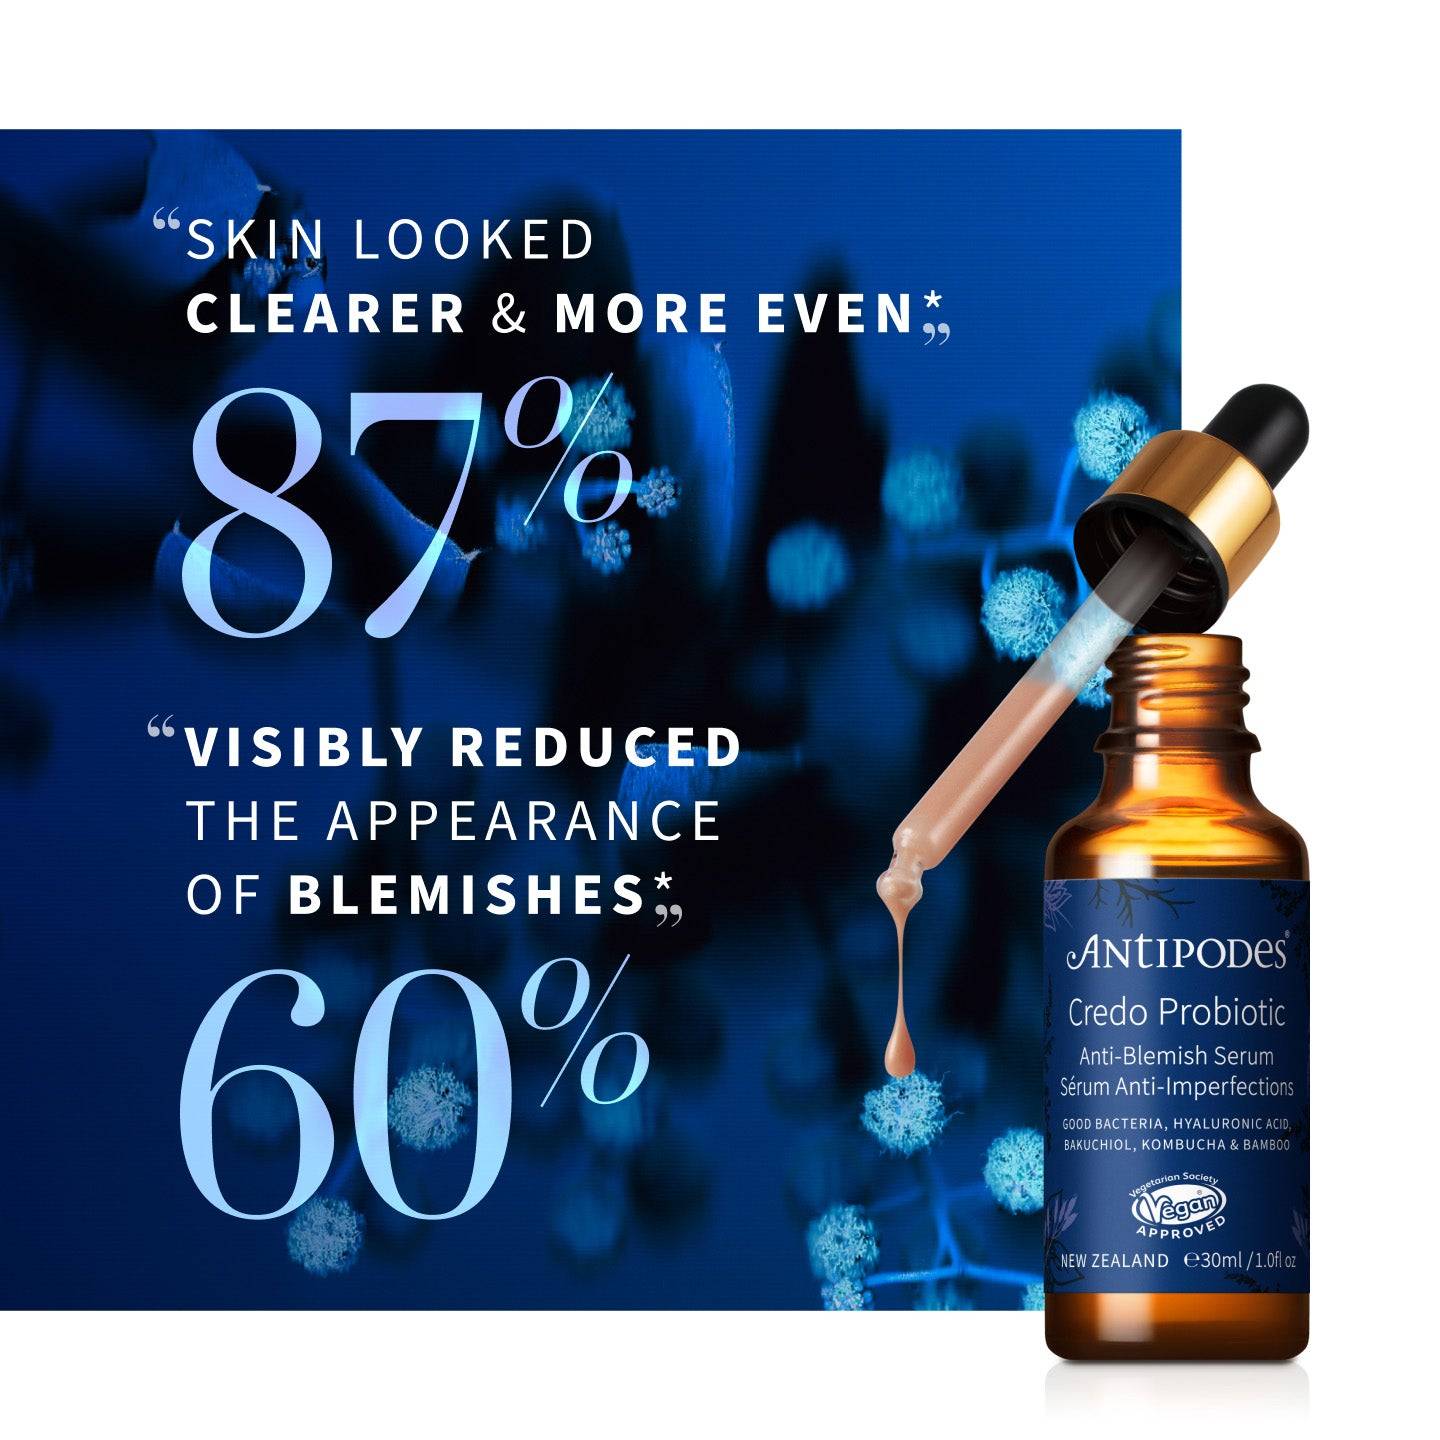 87% “skin looked clearer and more even”* 60% “visibly reduced the appearance of blemishes”*.